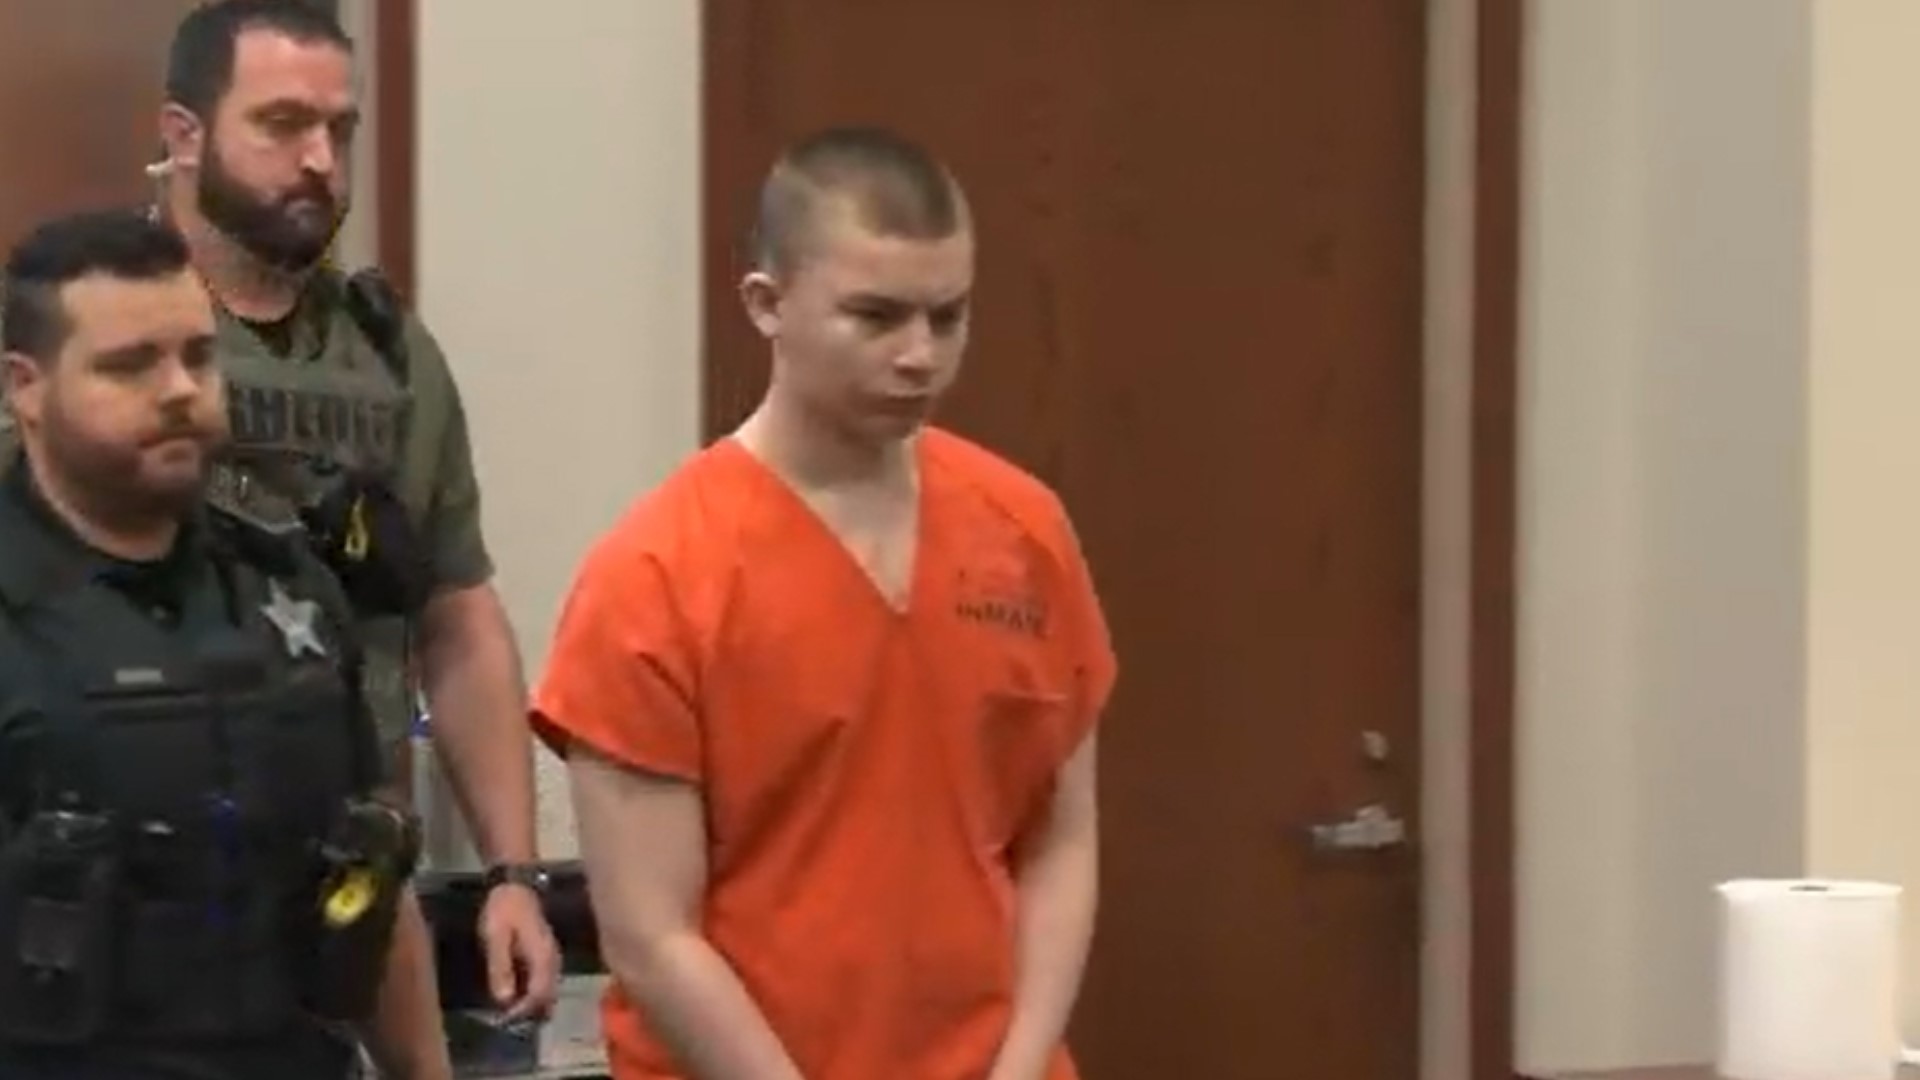 Nearly a year after Tristyn Bailey's murder, her accused killer, Aiden Fucci, appeared in St. Johns County court on Thursday ahead of his November trial.